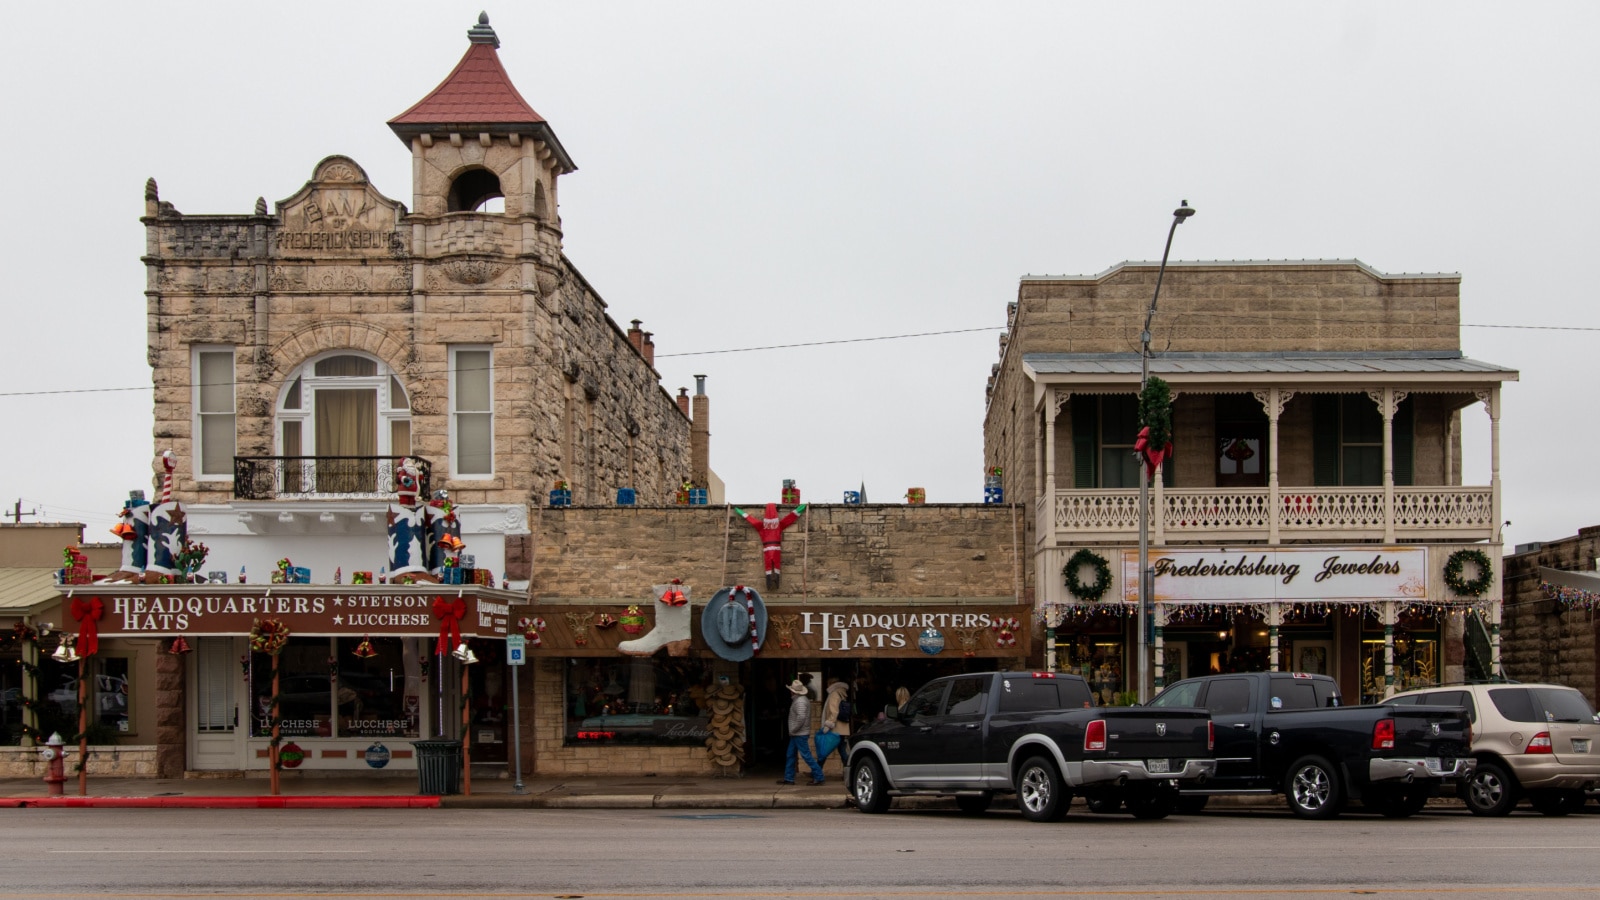 Fredericksburg, TX - USA - December `10 2019: Exterior of businesses on main street, including Headquarters Hats and Fredericksburg Jewelers